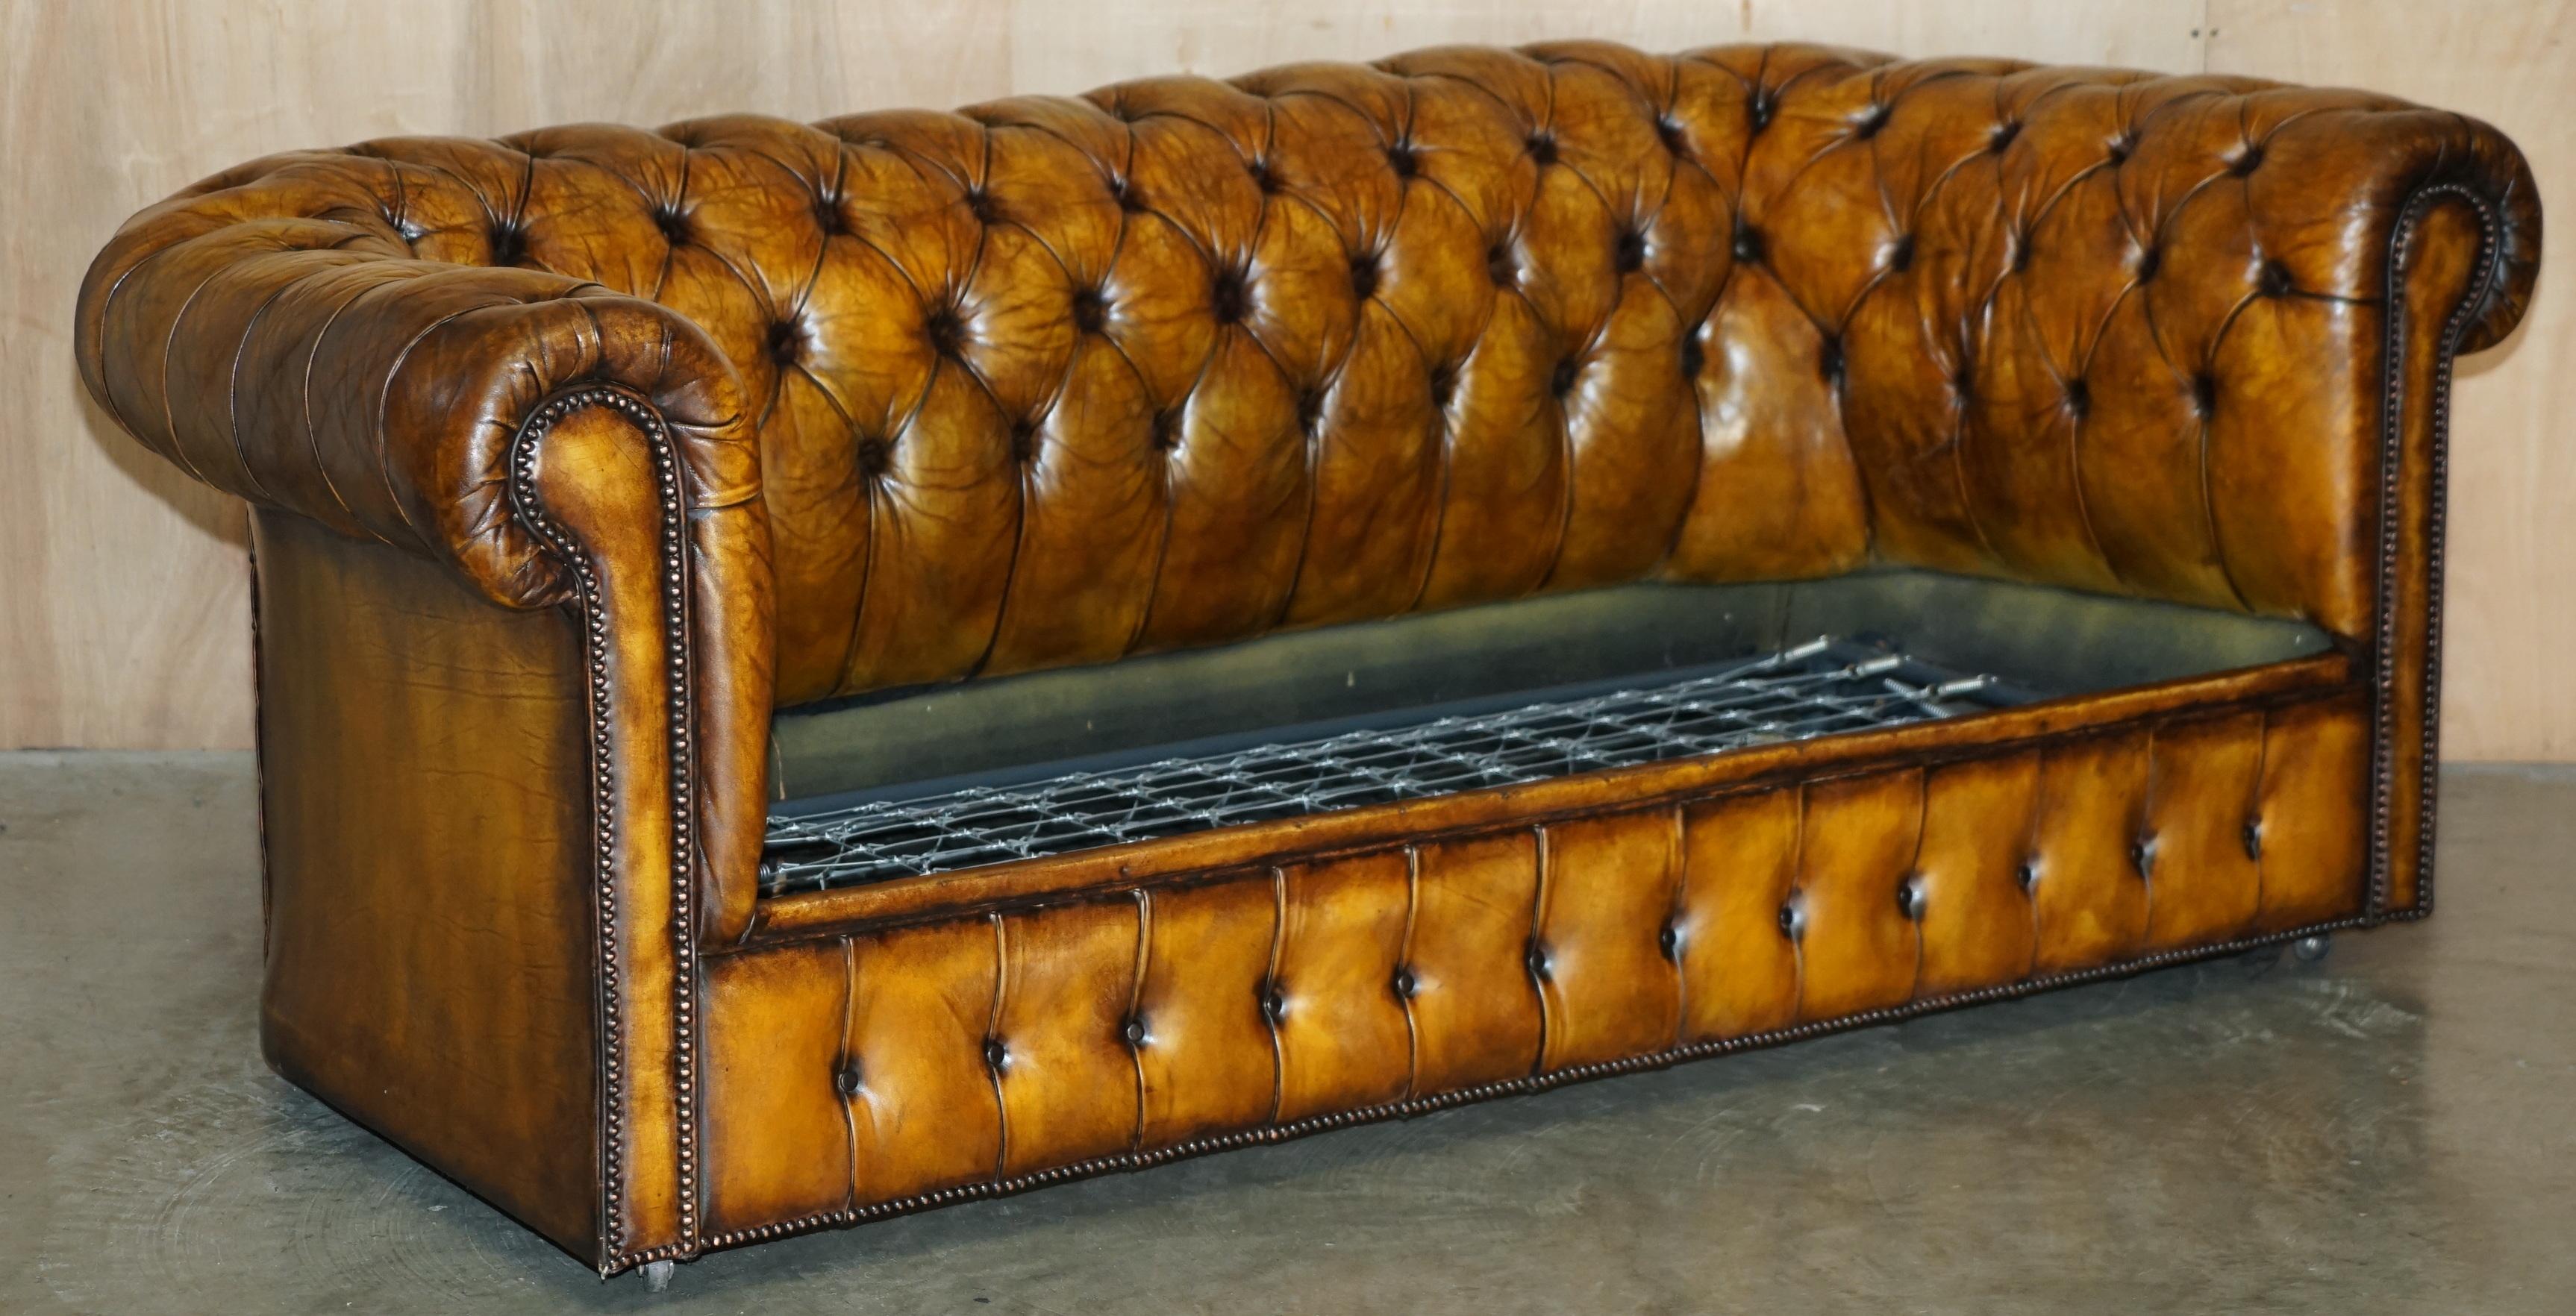 SUPER RARE FULLY RESTORED VINTAGE CIGAR BROWN LEATHER CHESTERFiELD SOFA BED For Sale 6